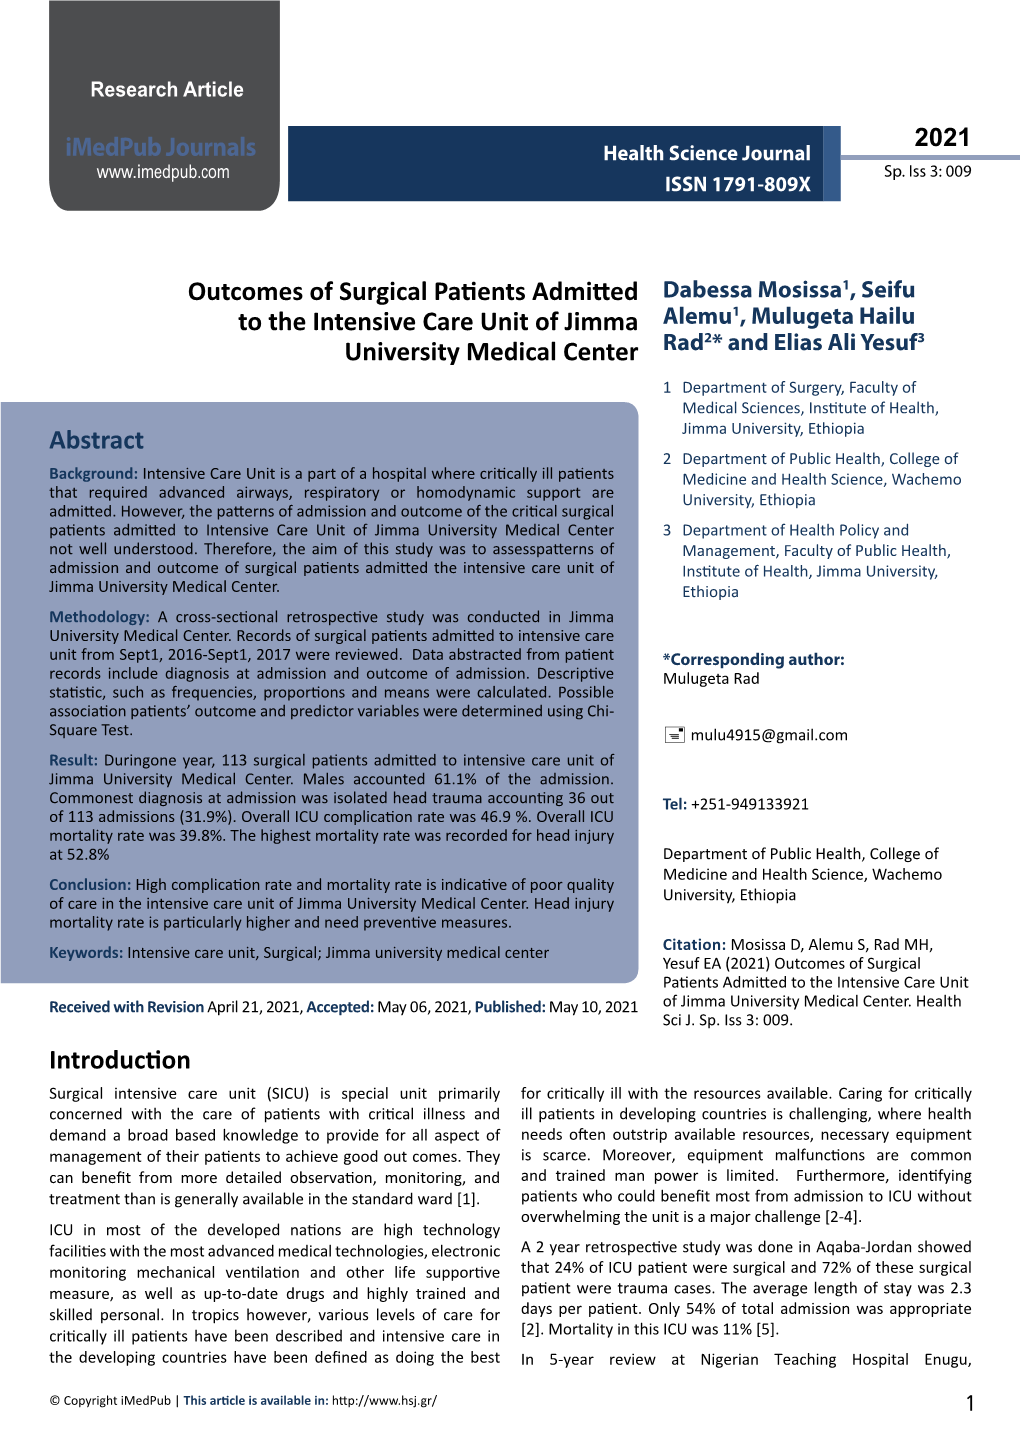 Outcomes of Surgical Patients Admitted to the Intensive Care Unit